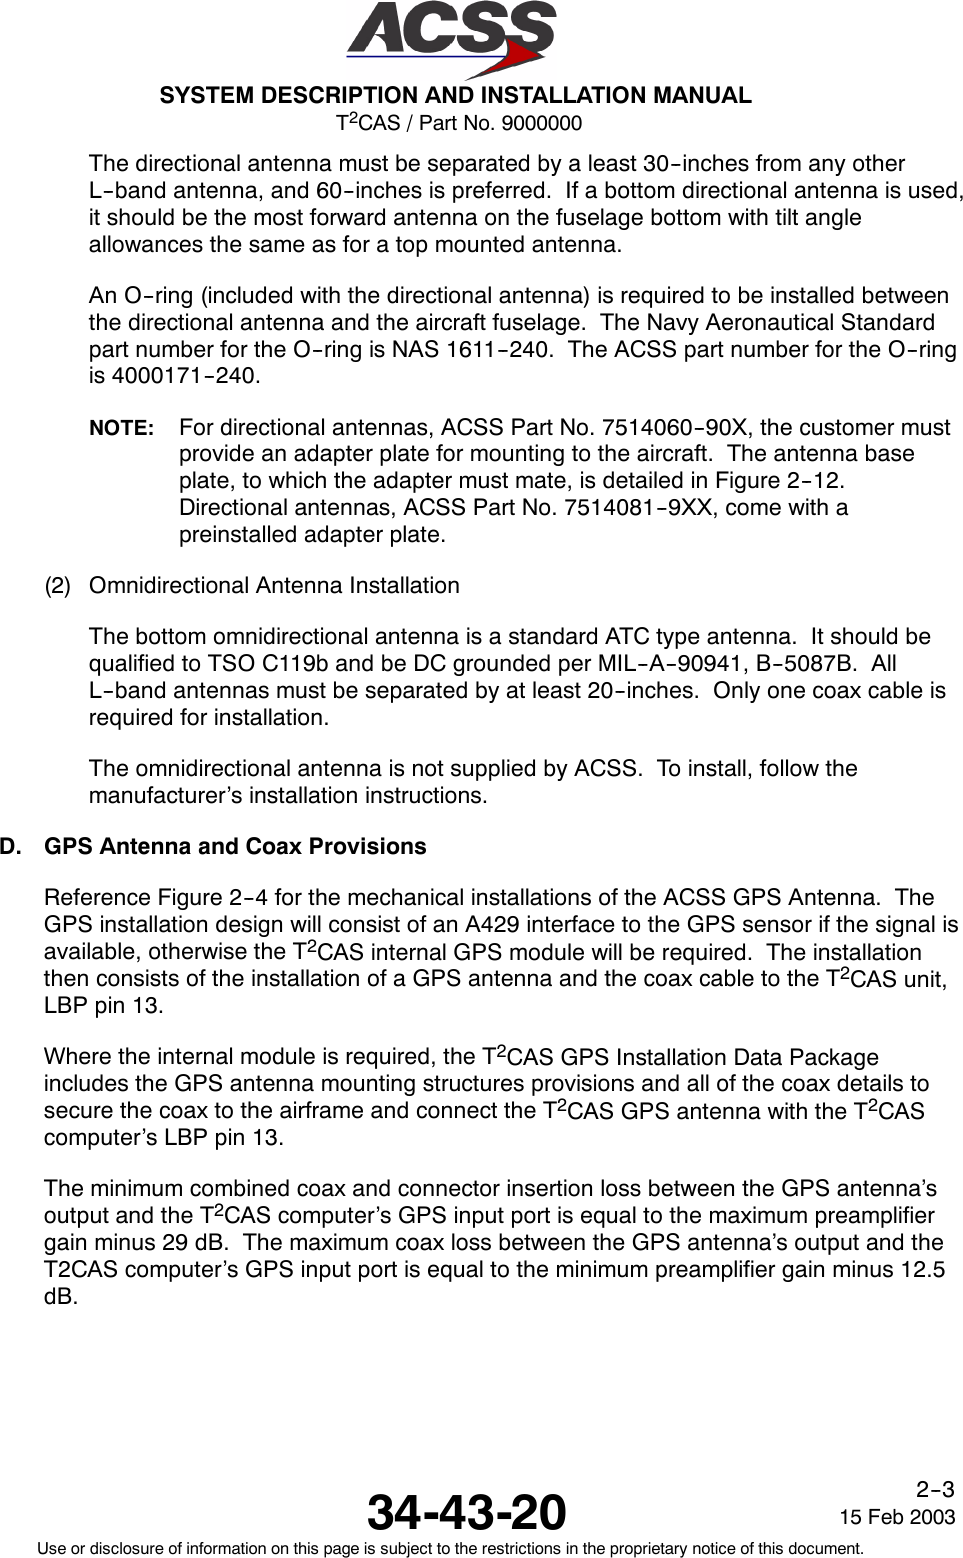 T2CAS / Part No. 9000000SYSTEM DESCRIPTION AND INSTALLATION MANUAL34-43-20 15 Feb 2003Use or disclosure of information on this page is subject to the restrictions in the proprietary notice of this document.2--3The directional antenna must be separated by a least 30--inches from any otherL--band antenna, and 60--inches is preferred. If a bottom directional antenna is used,it should be the most forward antenna on the fuselage bottom with tilt angleallowances the same as for a top mounted antenna.An O--ring (included with the directional antenna) is required to be installed betweenthe directional antenna and the aircraft fuselage. The Navy Aeronautical Standardpart number for the O--ring is NAS 1611--240. The ACSS part number for the O--ringis 4000171--240.NOTE: For directional antennas, ACSS Part No. 7514060--90X, the customer mustprovide an adapter plate for mounting to the aircraft. The antenna baseplate, to which the adapter must mate, is detailed in Figure 2--12.Directional antennas, ACSS Part No. 7514081--9XX, come with apreinstalled adapter plate.(2) Omnidirectional Antenna InstallationThe bottom omnidirectional antenna is a standard ATC type antenna. It should bequalified to TSO C119b and be DC grounded per MIL--A--90941, B--5087B. AllL--band antennas must be separated by at least 20--inches. Only one coax cable isrequired for installation.The omnidirectional antenna is not supplied by ACSS. To install, follow themanufacturer’s installation instructions.D. GPS Antenna and Coax ProvisionsReference Figure 2--4 for the mechanical installations of the ACSS GPS Antenna. TheGPS installation design will consist of an A429 interface to the GPS sensor if the signal isavailable, otherwise the T2CAS internal GPS module will be required. The installationthen consists of the installation of a GPS antenna and the coax cable to the T2CAS unit,LBP pin 13.Where the internal module is required, the T2CAS GPS Installation Data Packageincludes the GPS antenna mounting structures provisions and all of the coax details tosecure the coax to the airframe and connect the T2CAS GPS antenna with the T2CAScomputer’s LBP pin 13.The minimum combined coax and connector insertion loss between the GPS antenna’soutput and the T2CAS computer’s GPS input port is equal to the maximum preamplifiergain minus 29 dB. The maximum coax loss between the GPS antenna’s output and theT2CAS computer’s GPS input port is equal to the minimum preamplifier gain minus 12.5dB.